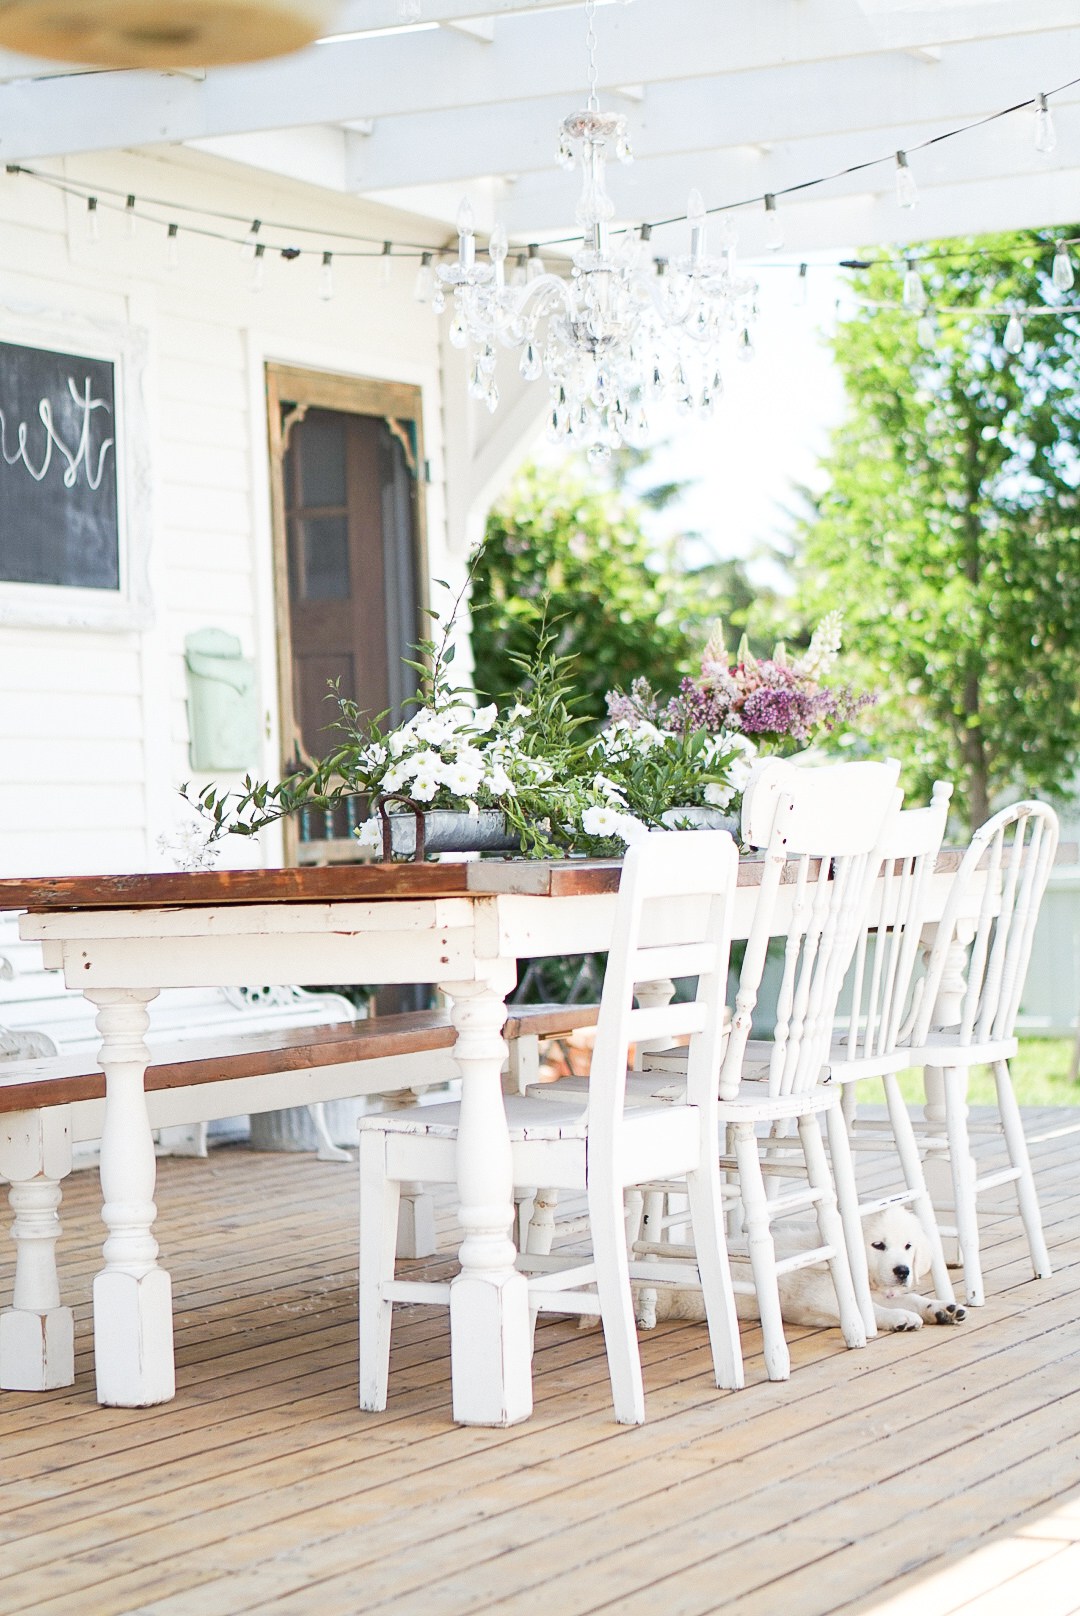 Farmhouse porch with table and mismatched chairs kellyelko.com #farmhousestyle #patio #farmhousefurniture #vintagestyle 